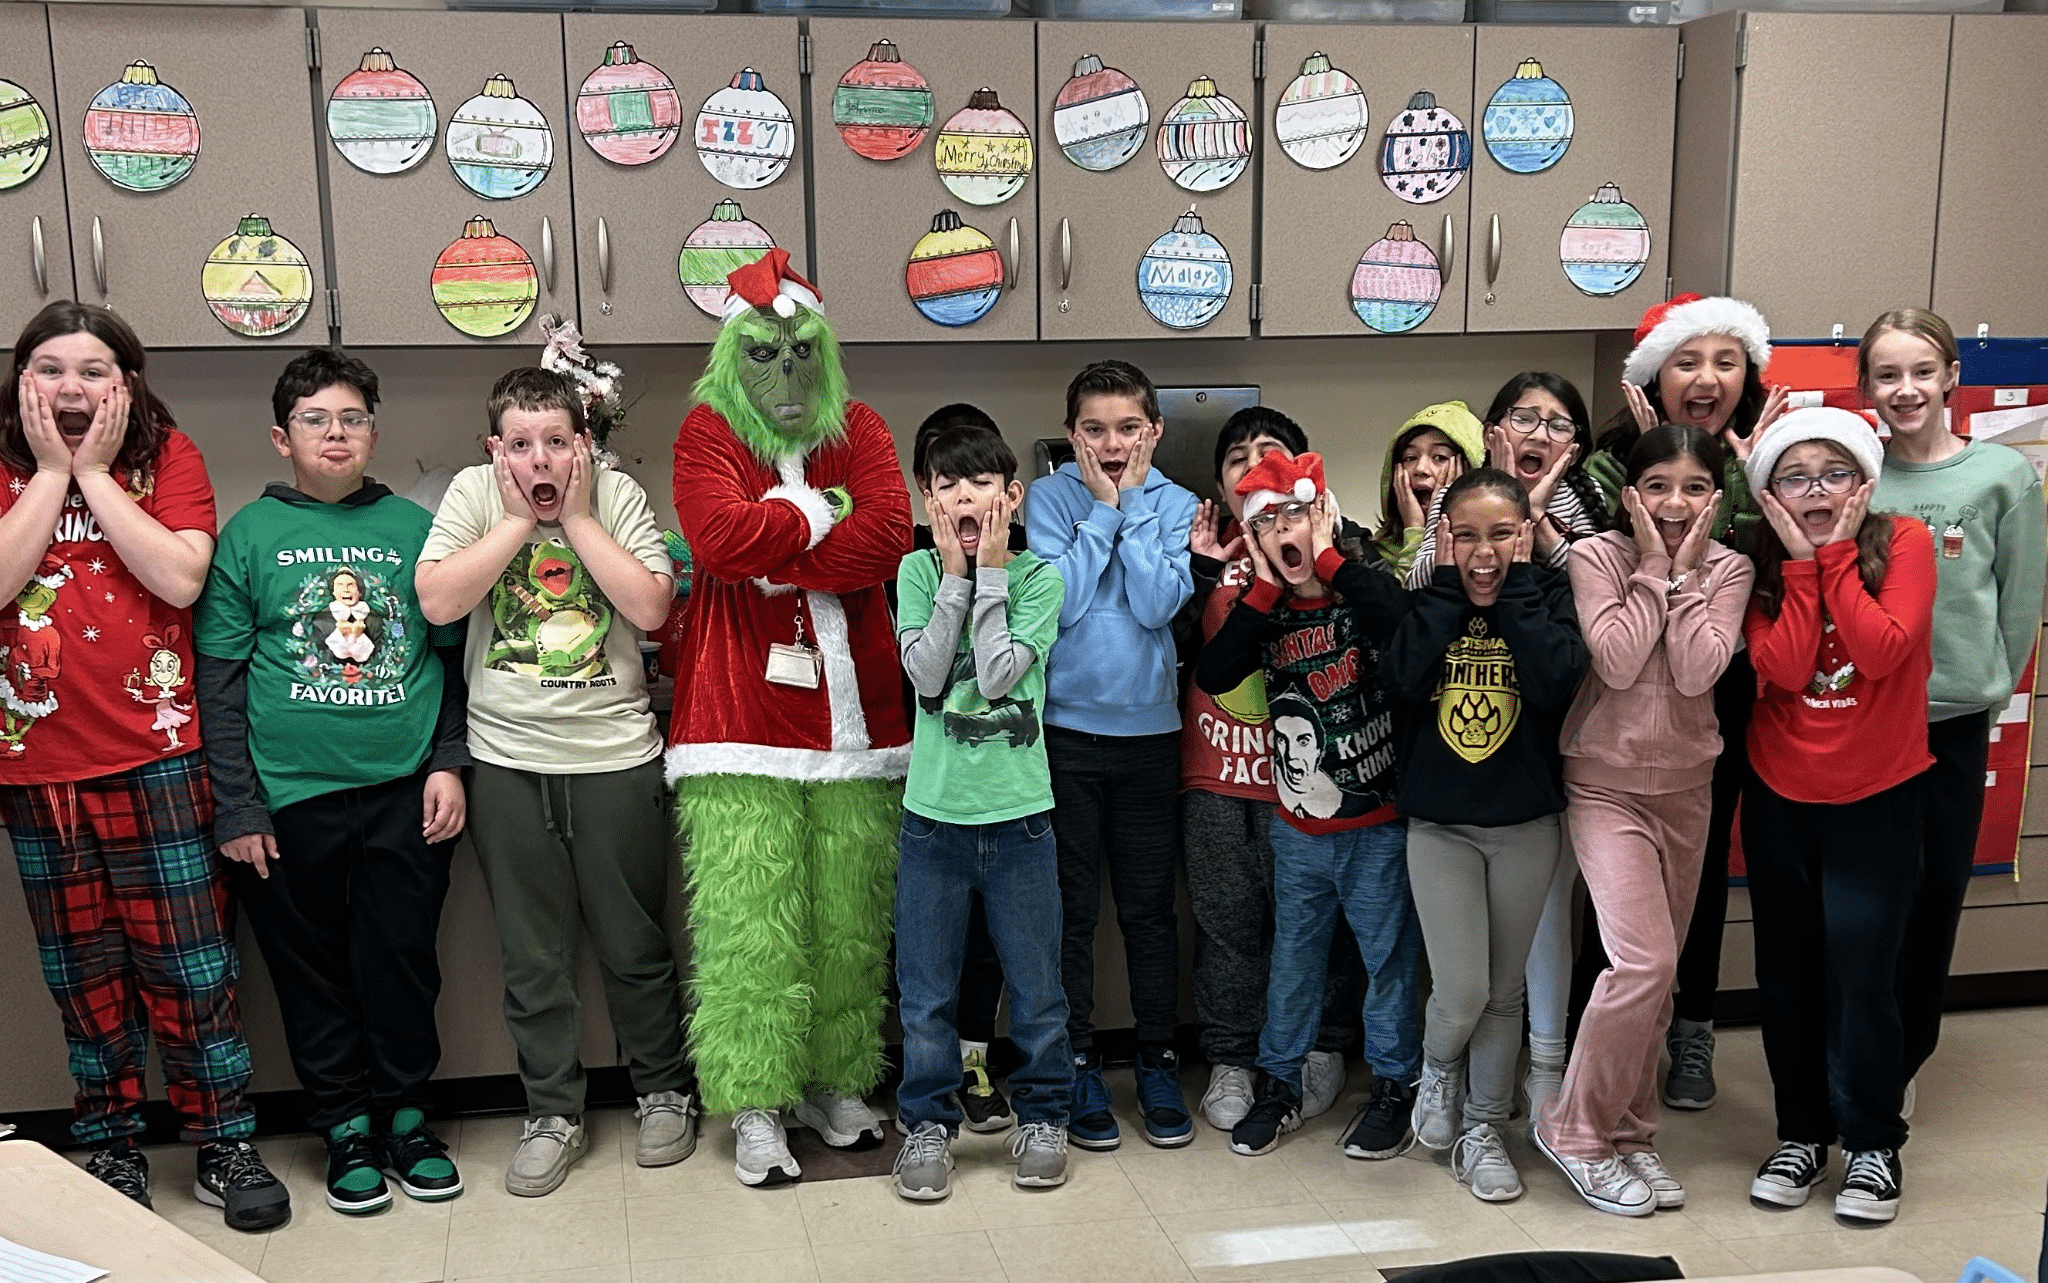 Mrs Ramirez (or shall I say Mr. Grinch) conducted class in the fourth grade hallway last Friday.